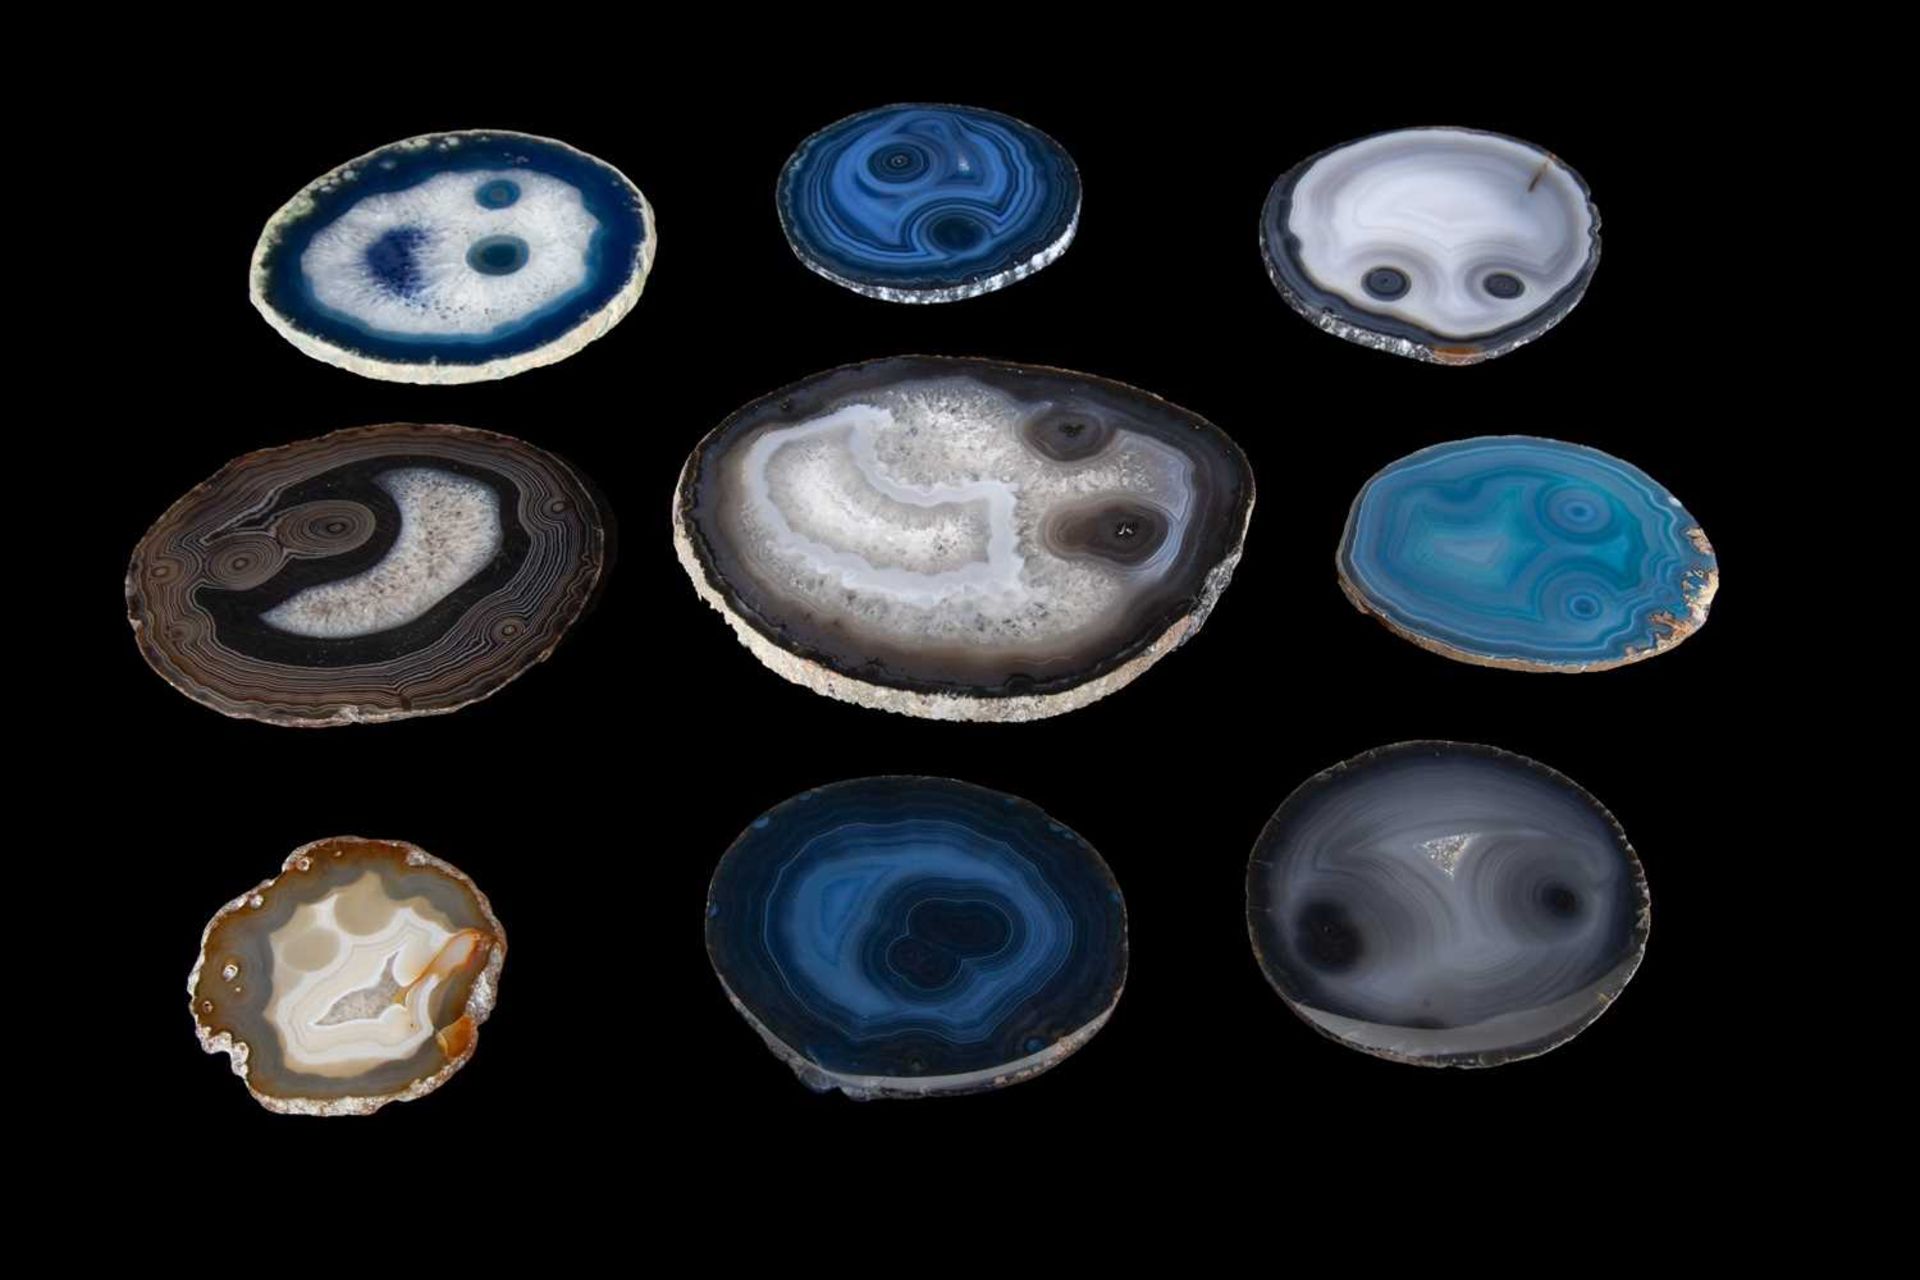 NINE SLICES OF AGATE RESEMBLING HUMAN FACES